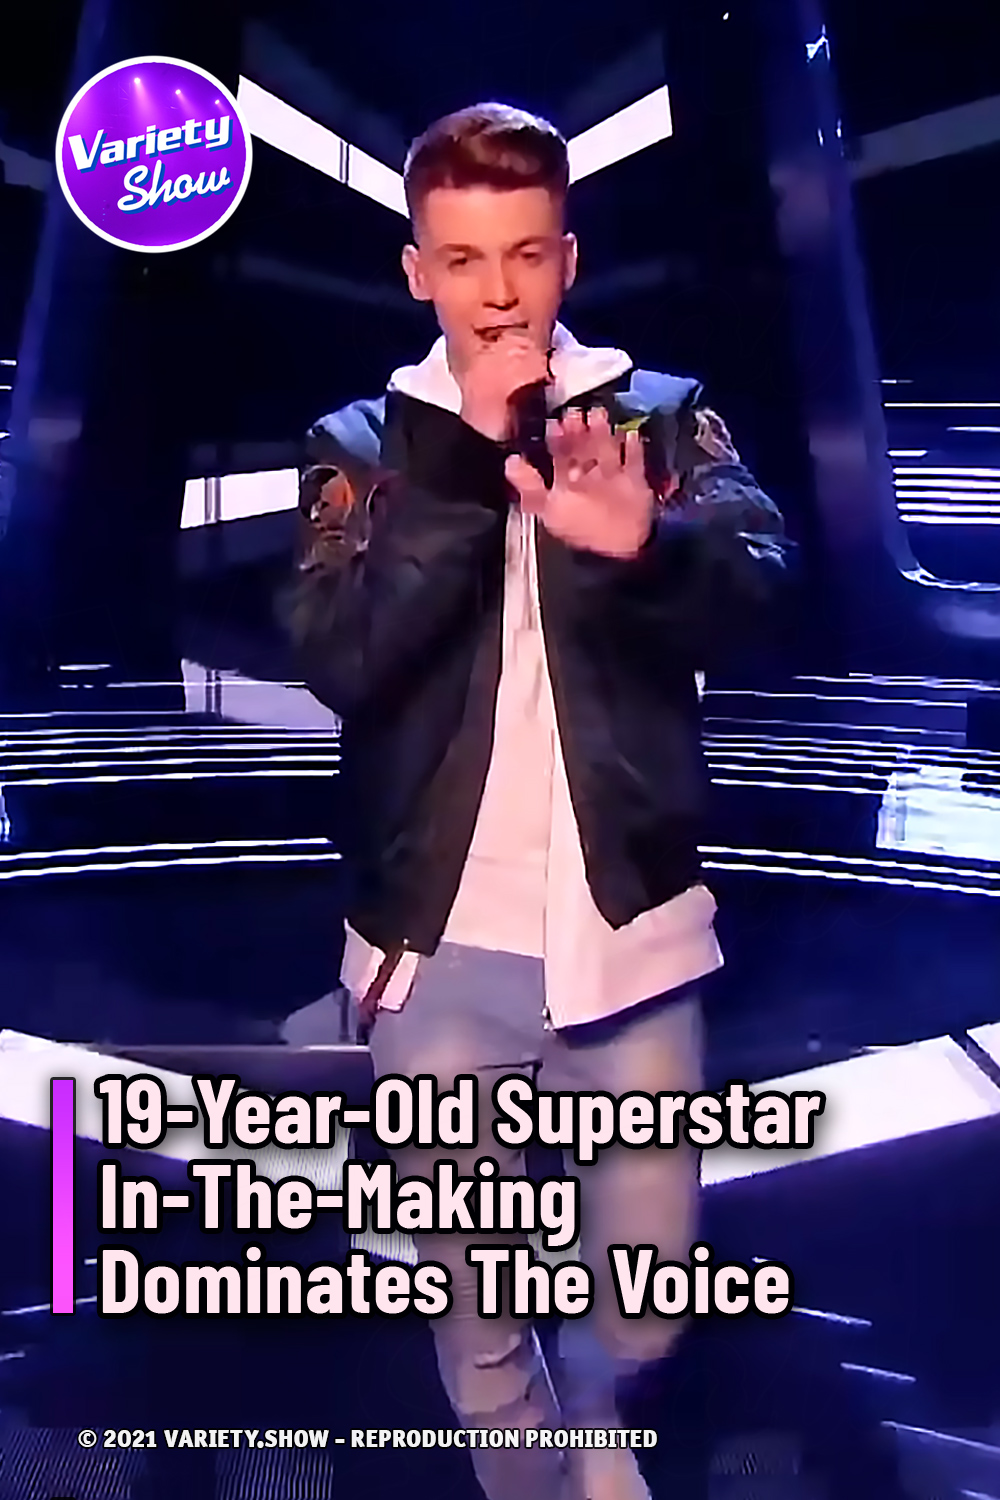 19-Year-Old Superstar In-The-Making Dominates The Voice